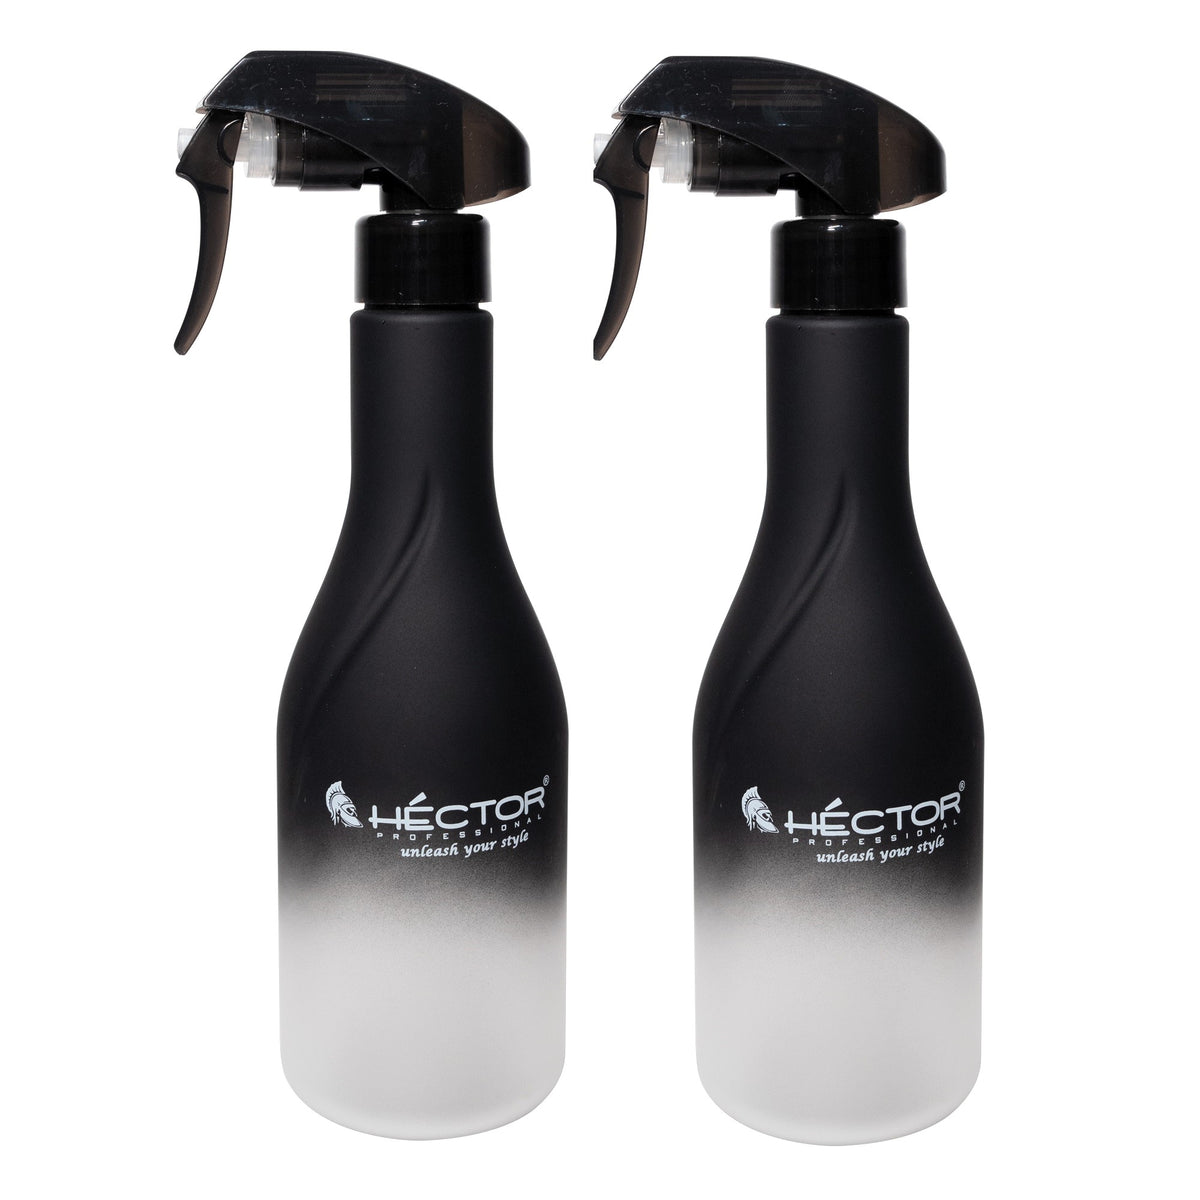 HECTOR Mist Spray Water Bottle For Hairstyling | Salon Use | Ironing | Plant Misting | Gadget & Car Cleaning | Dispensing Sanitizer | 300 ML Empty Bottle For Salon & Home | Pack of 2 Bottles